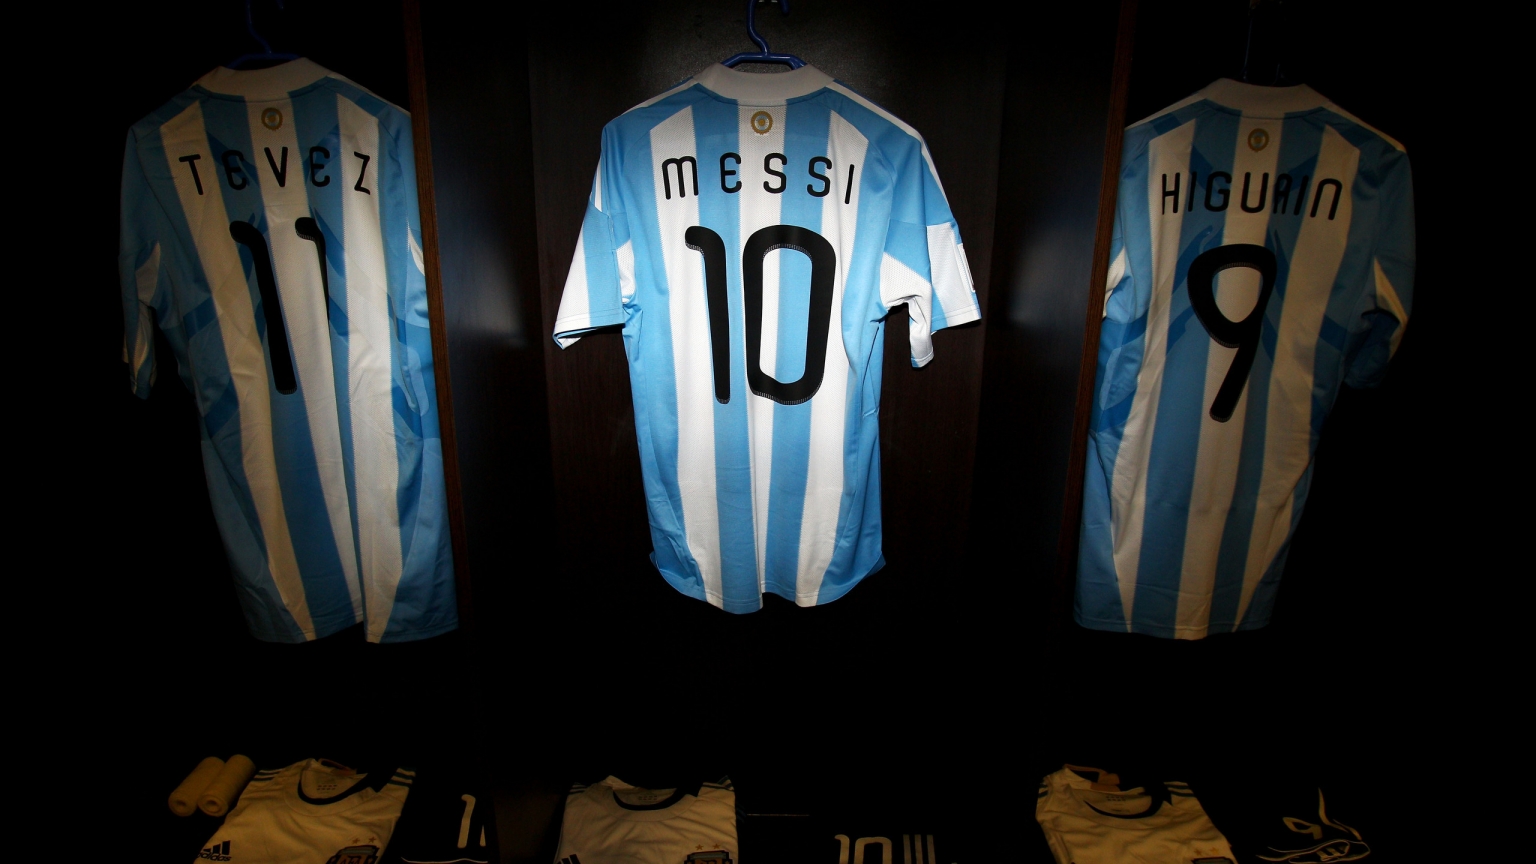 Tshirt of Messi, Tevez and Higuain for 1536 x 864 HDTV resolution